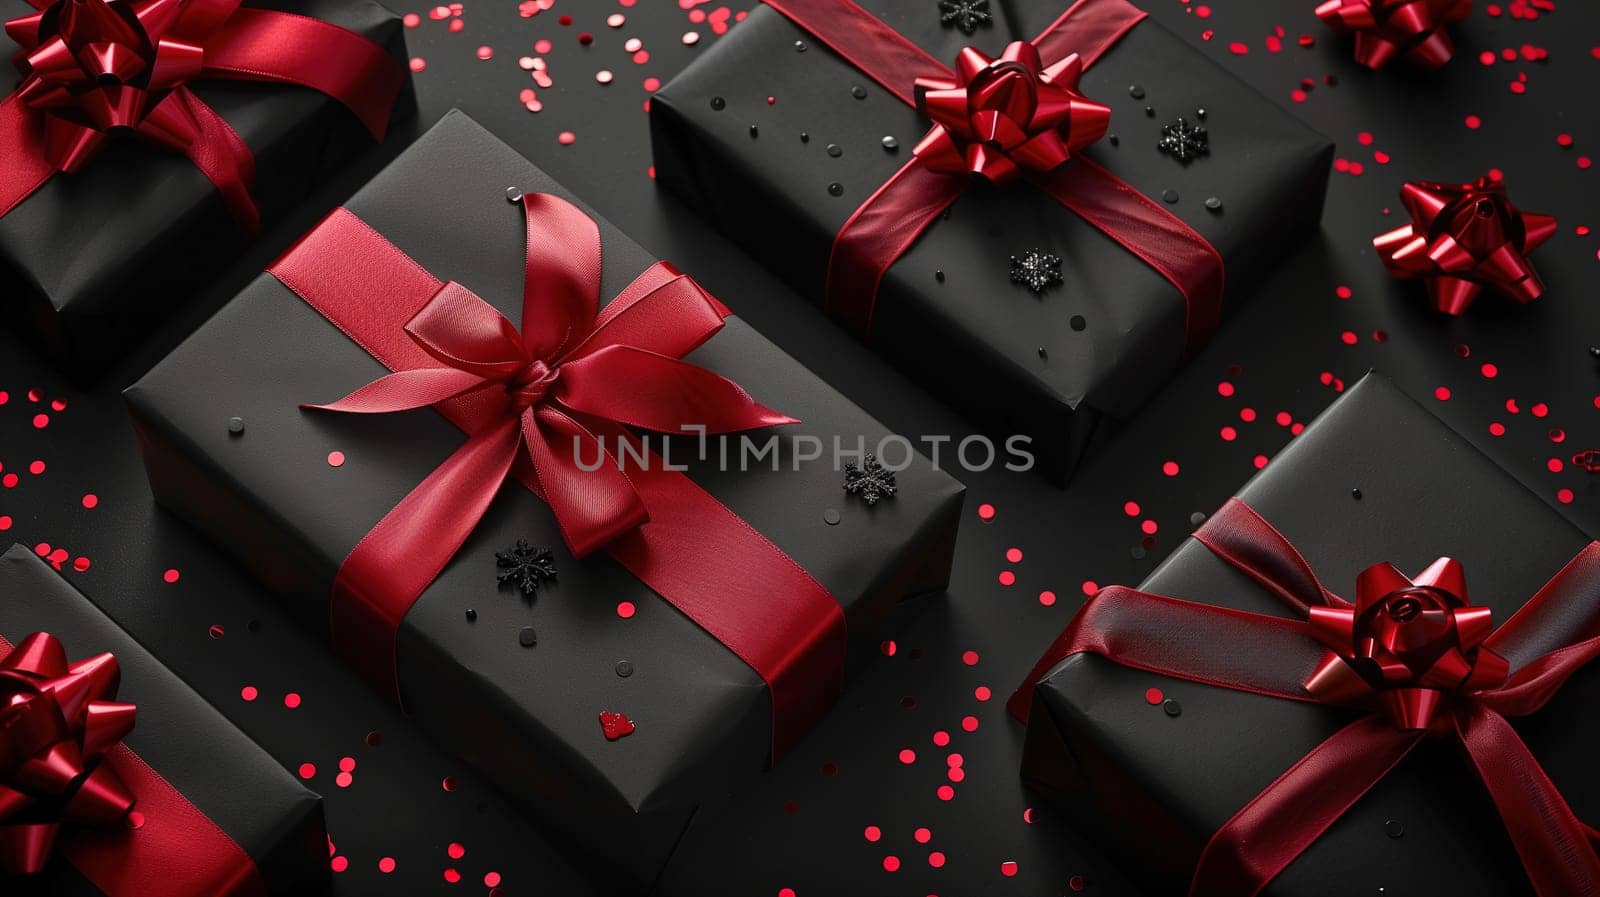 Multiple black and red wrapped presents are clustered together, creating a visually striking display. The gifts are neatly arranged, ready for a special occasion or holiday celebration. The image conveys the concept of gifts, presents, and the excitement of a sale event like Black Friday.